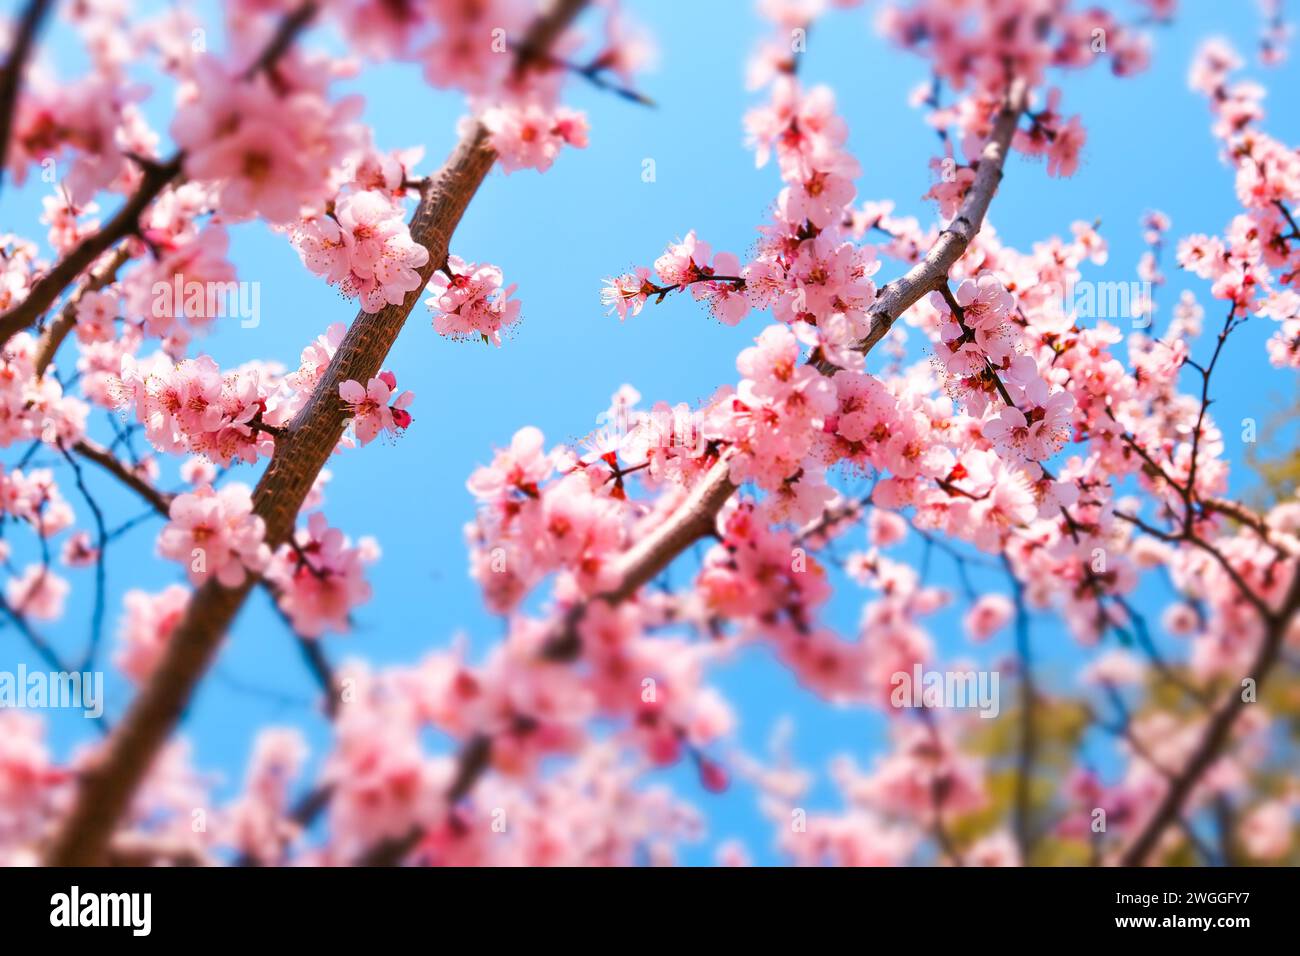 Blooming cherry blossoms on branch, exquisite and captivating Stock Photo